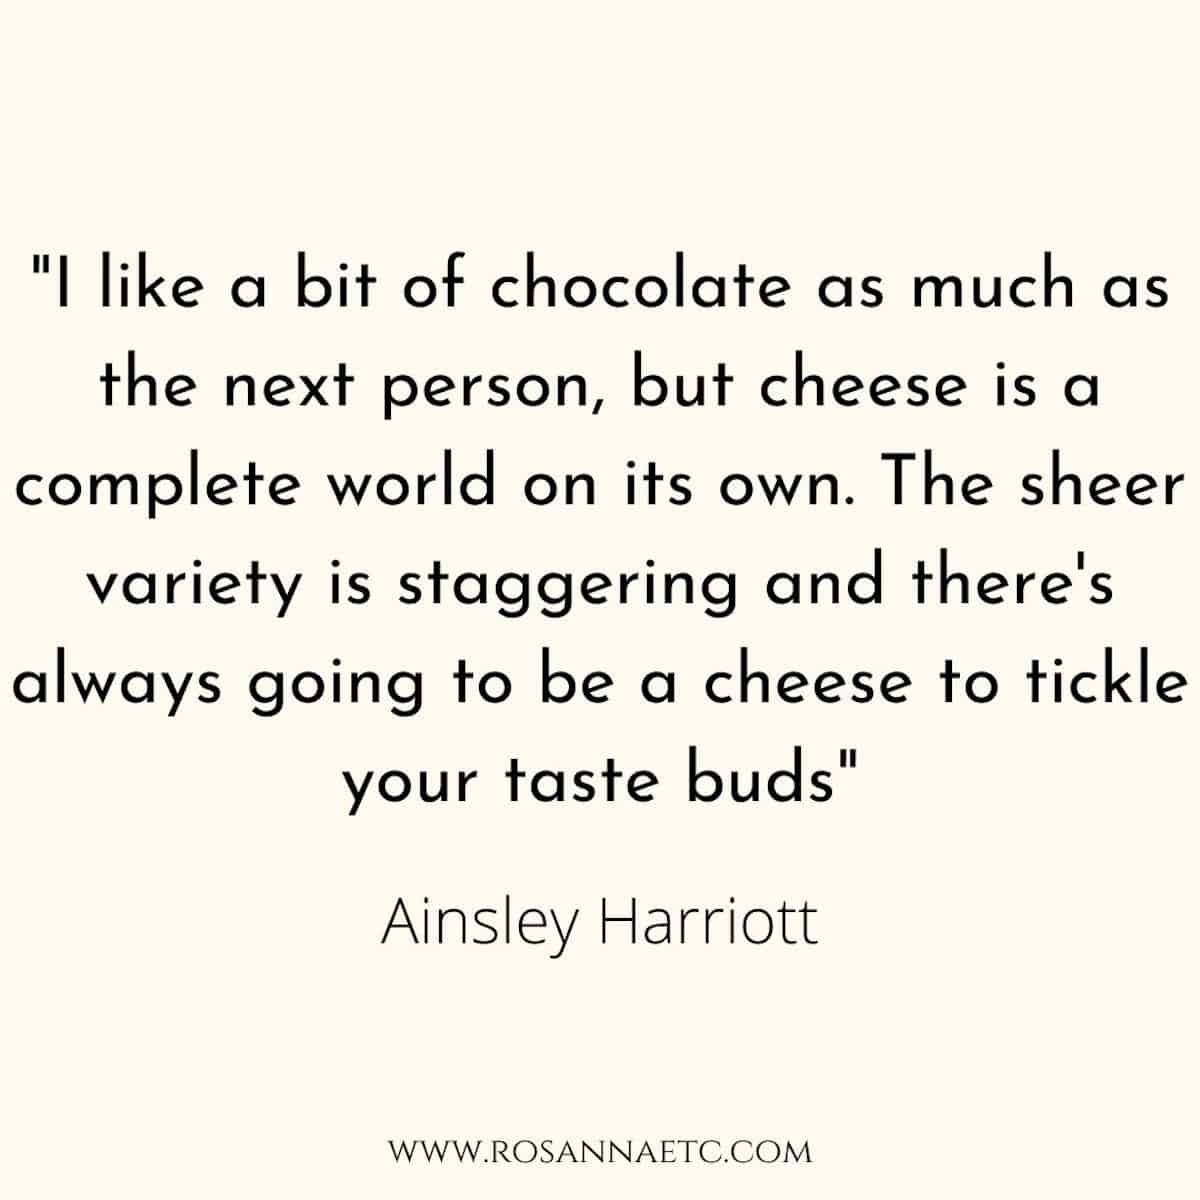 Quote from Ainsley Harriott that reads "I like a bit of chocolate as much as the next person, but cheese is a complete world on its own. The sheer variety is staggering and there's always going to be a cheese to tickle your taste buds".